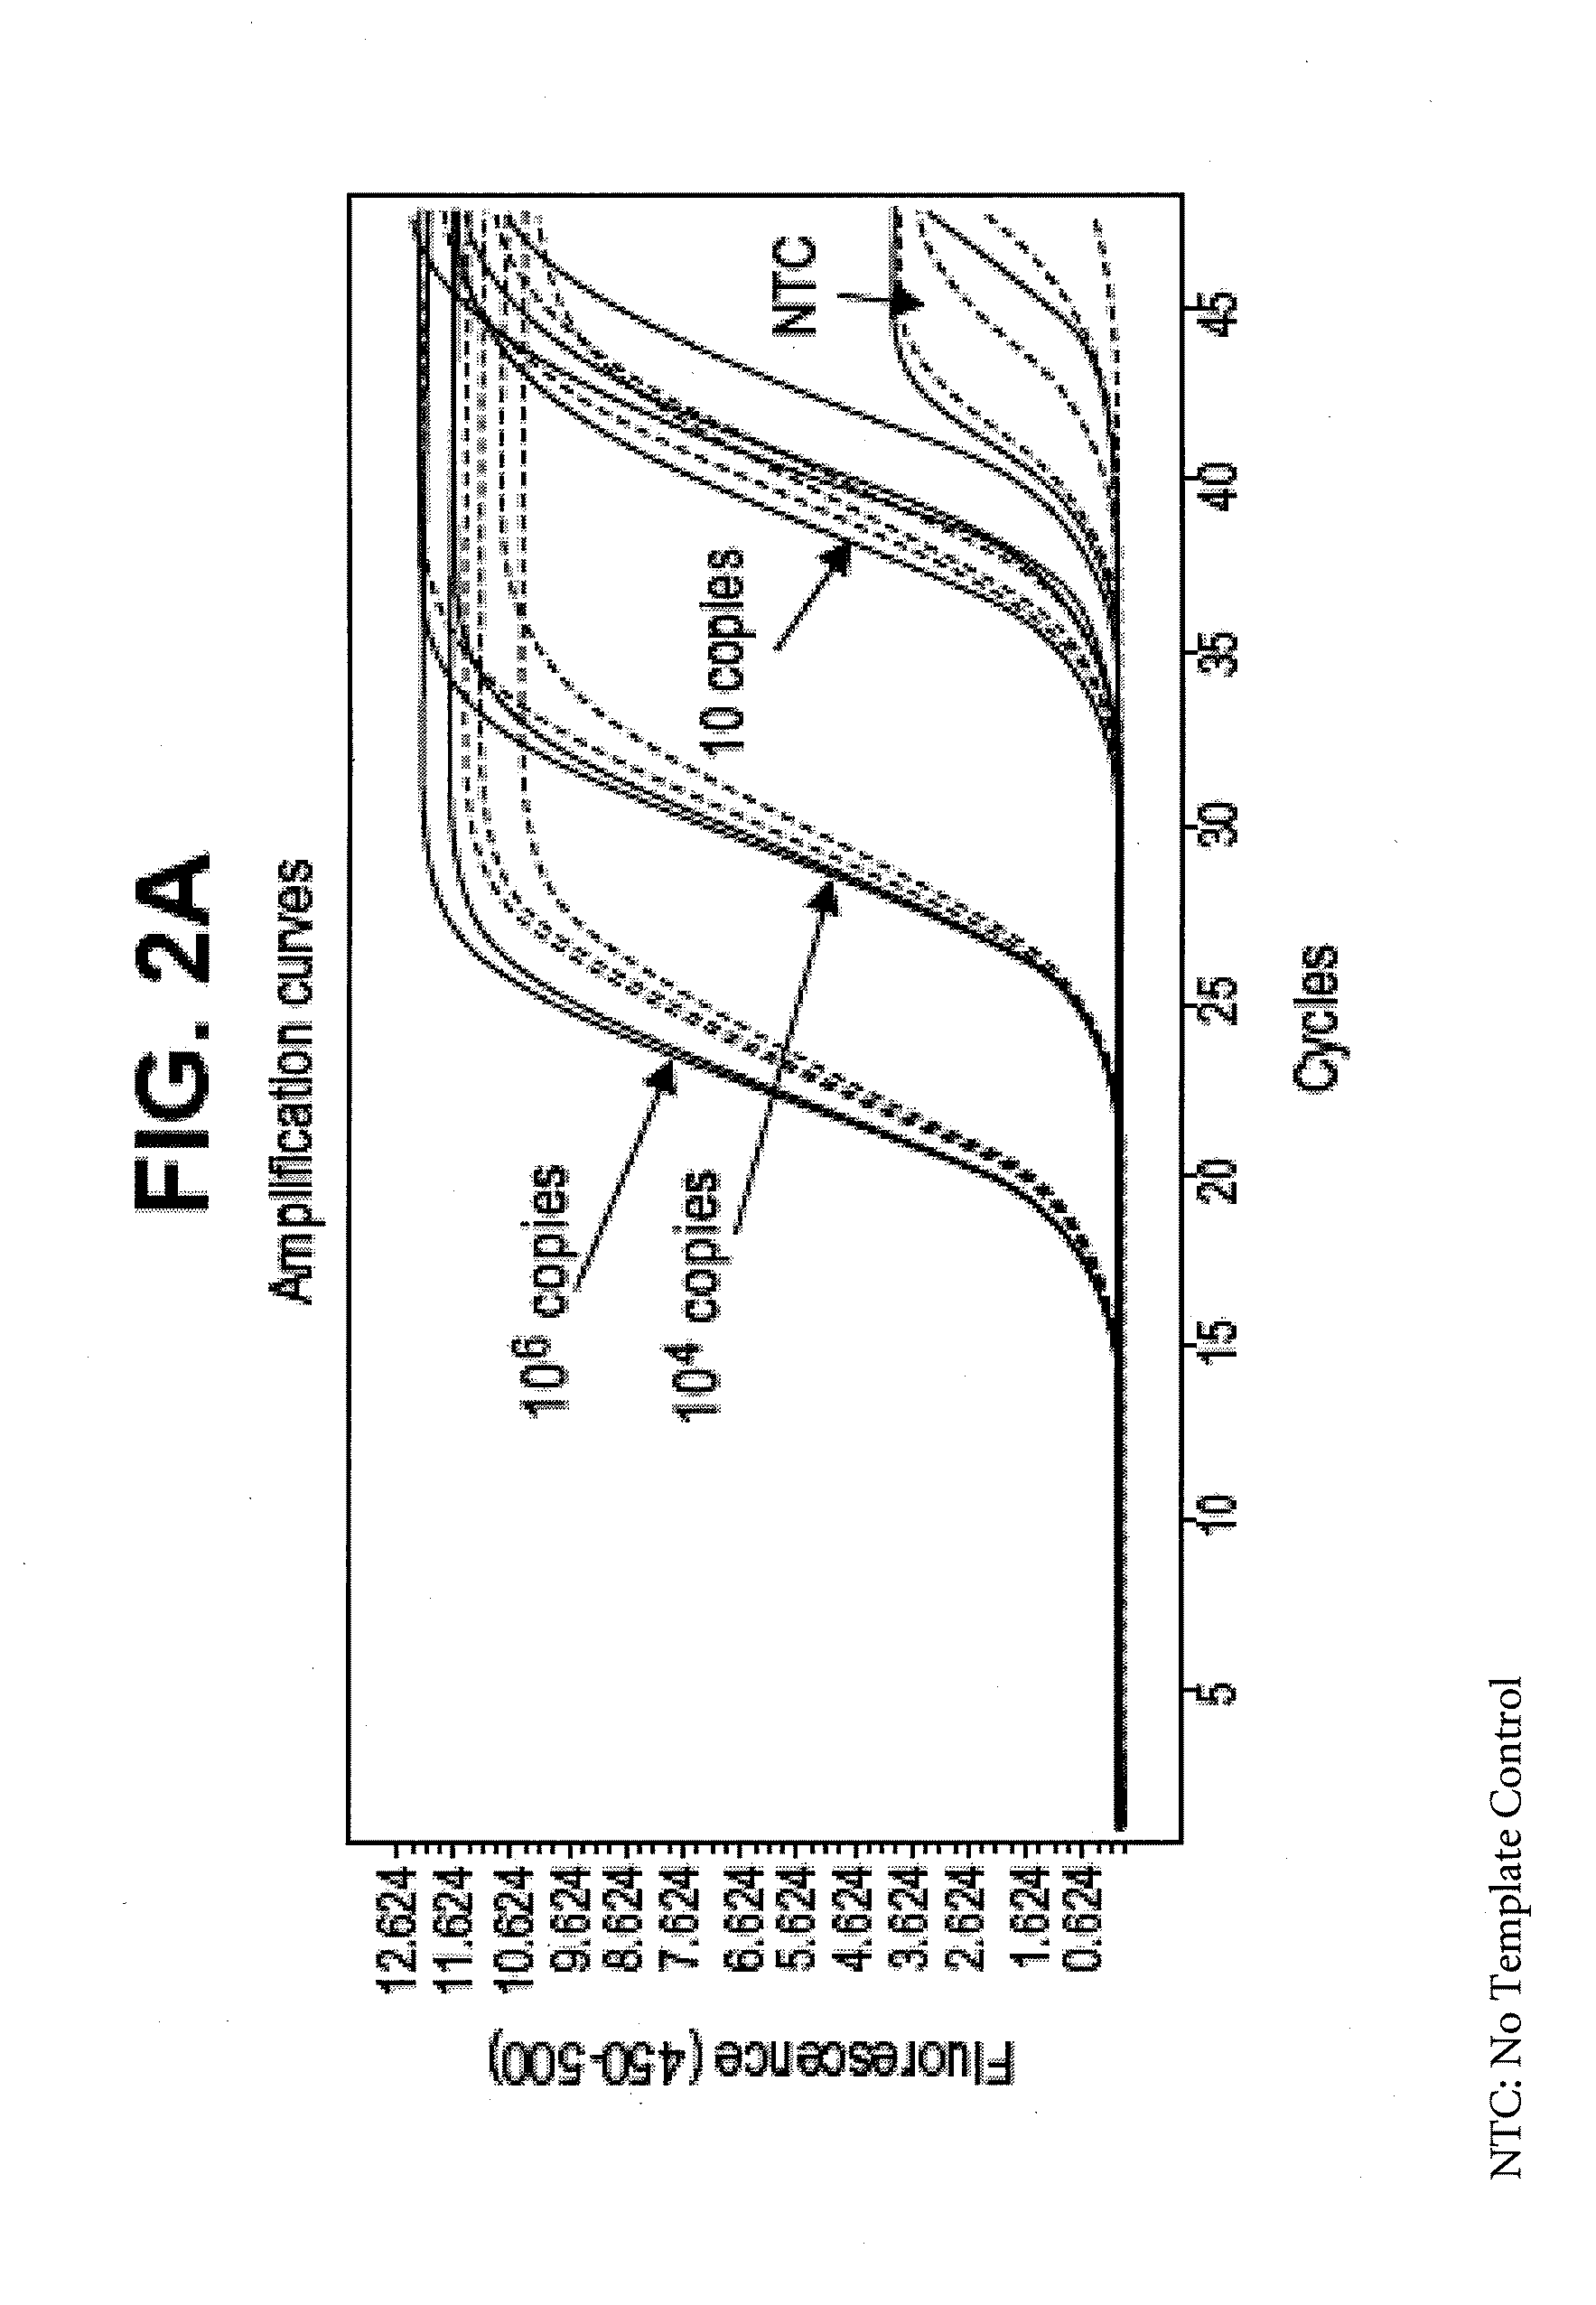 Method for the prevention of carryover contamination in nucleic acid amplification technologies